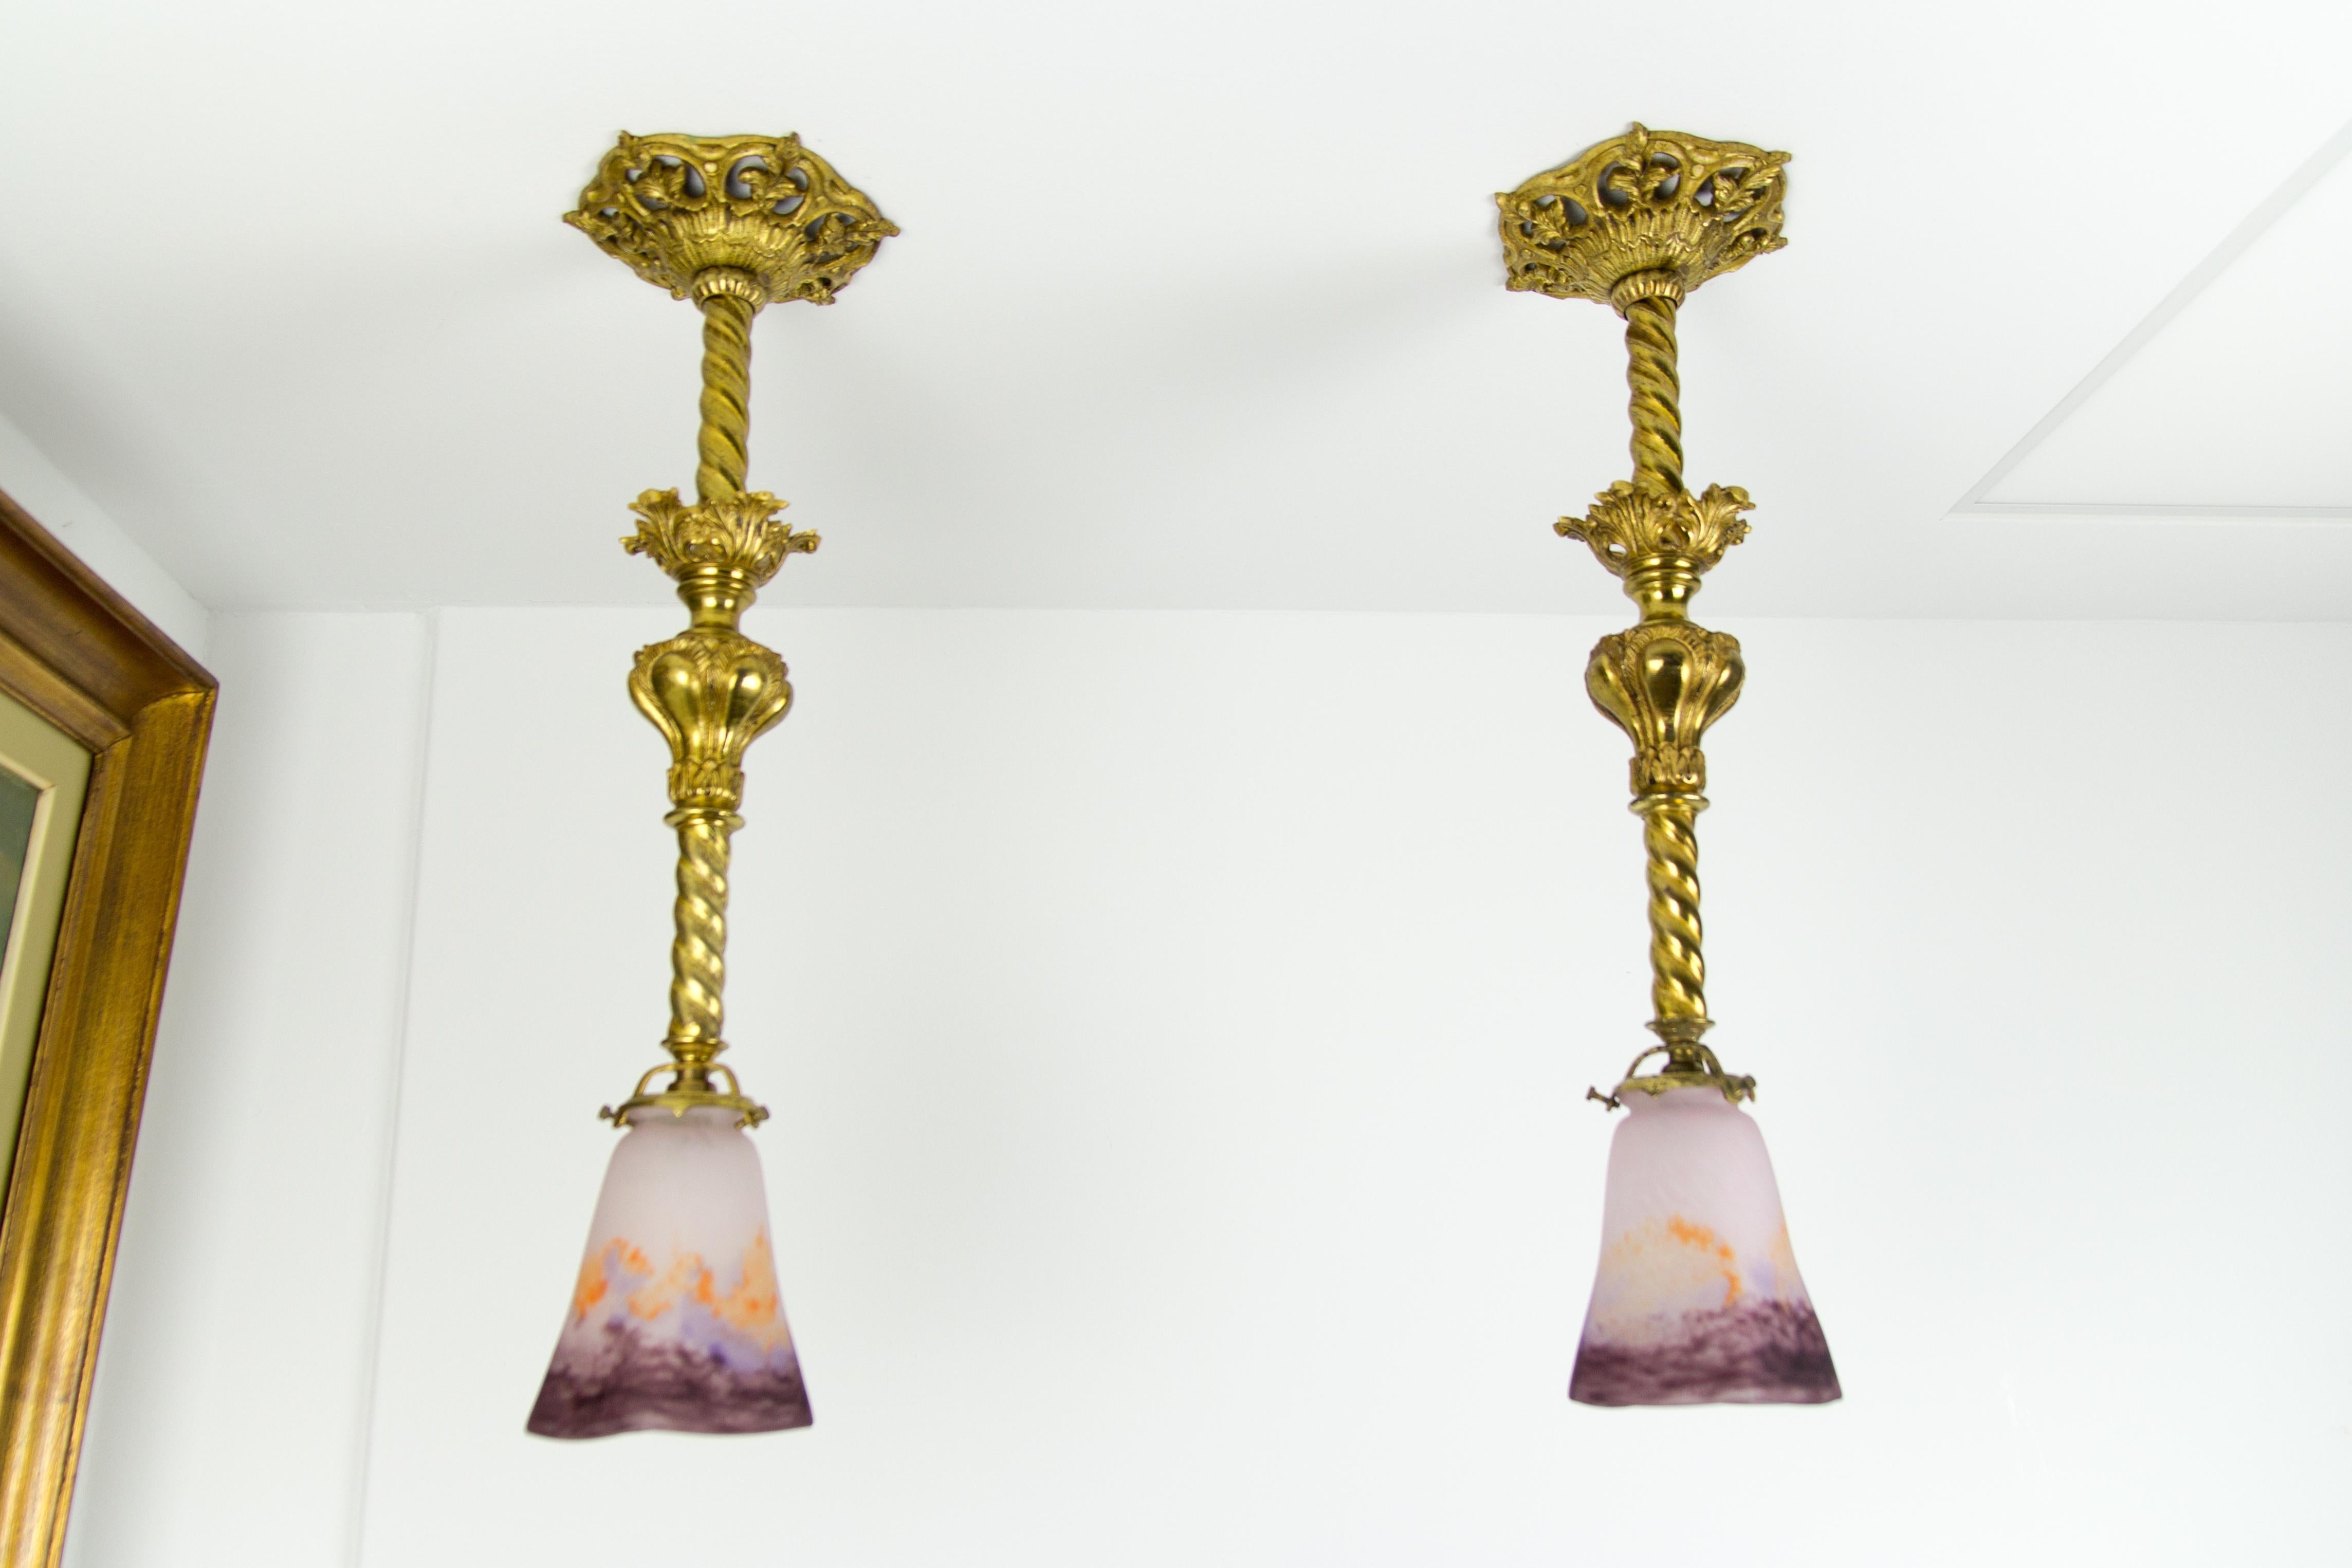 An impressive pair of early 20th-century ornate gilt bronze pendant light fixtures with Pate de Verre glass shades in purple and orange, signed in the glass “Muller Strasbourg”. Each pendant light fixture has one socket for a B22-size light